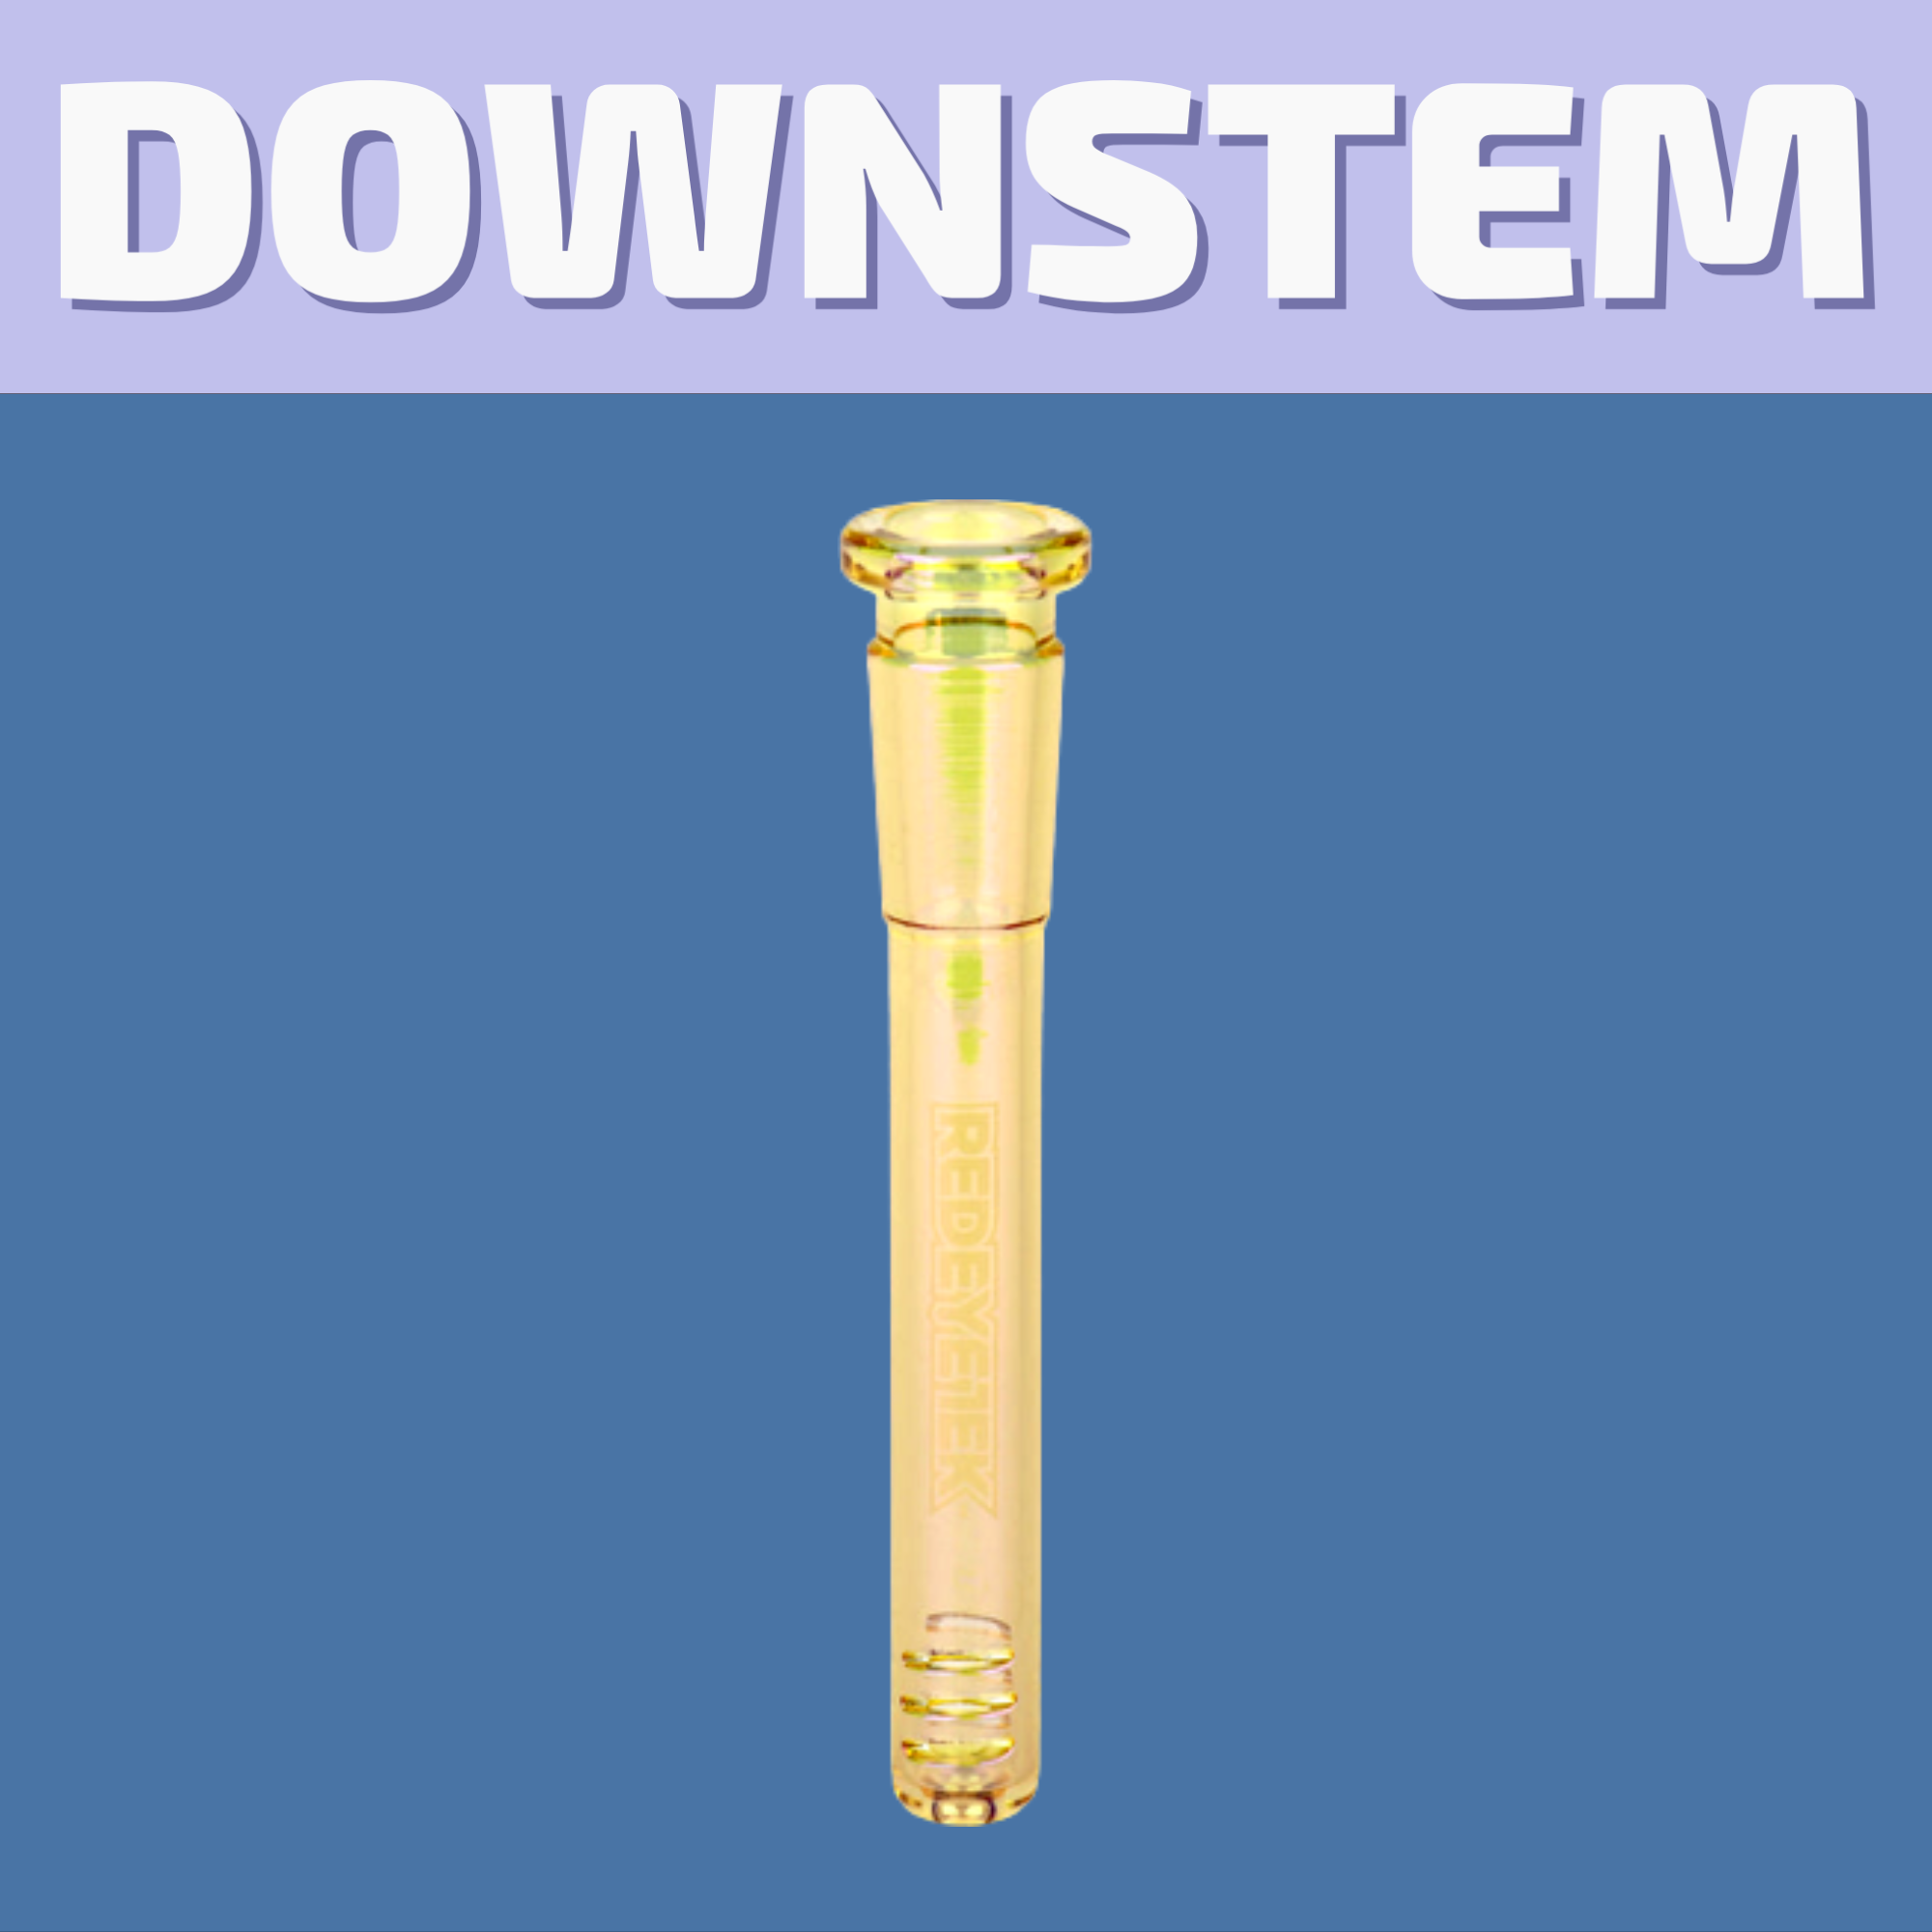 Shop Winnipeg's best selection of Downstems, Ash Catchers, Bong Bowls, and Adaptors or same day delivery or buy them in-store.   